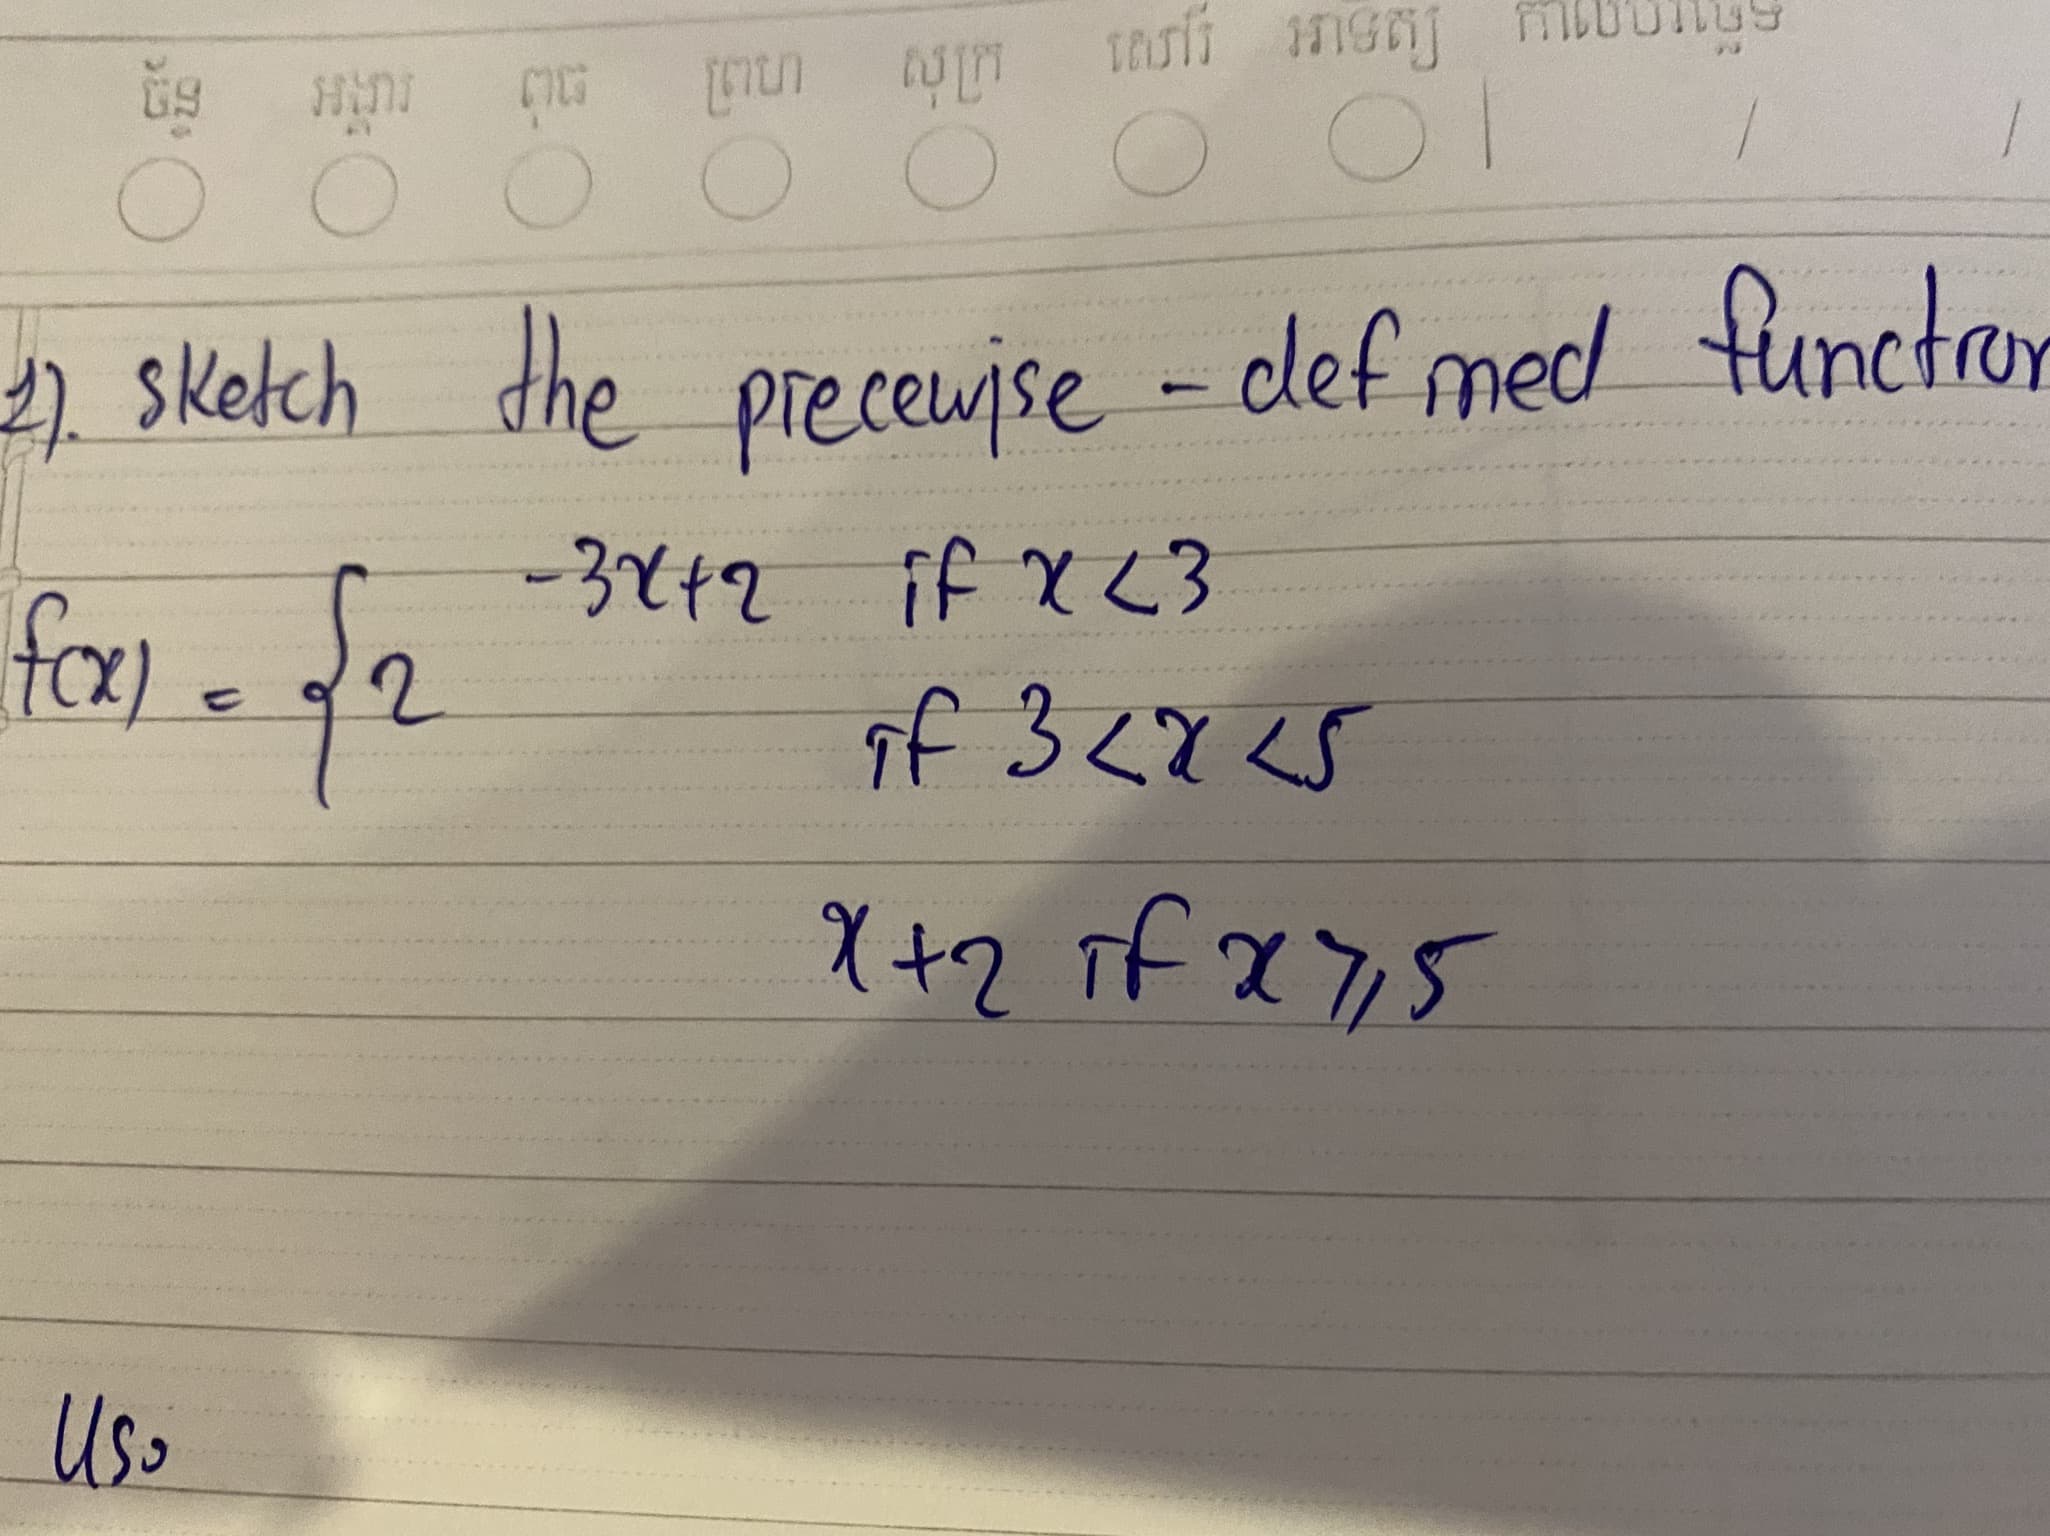 sketch
the preceujse - def med tunctror
-32+2 if x <3
far.
for
2.
of 3<Y<S
